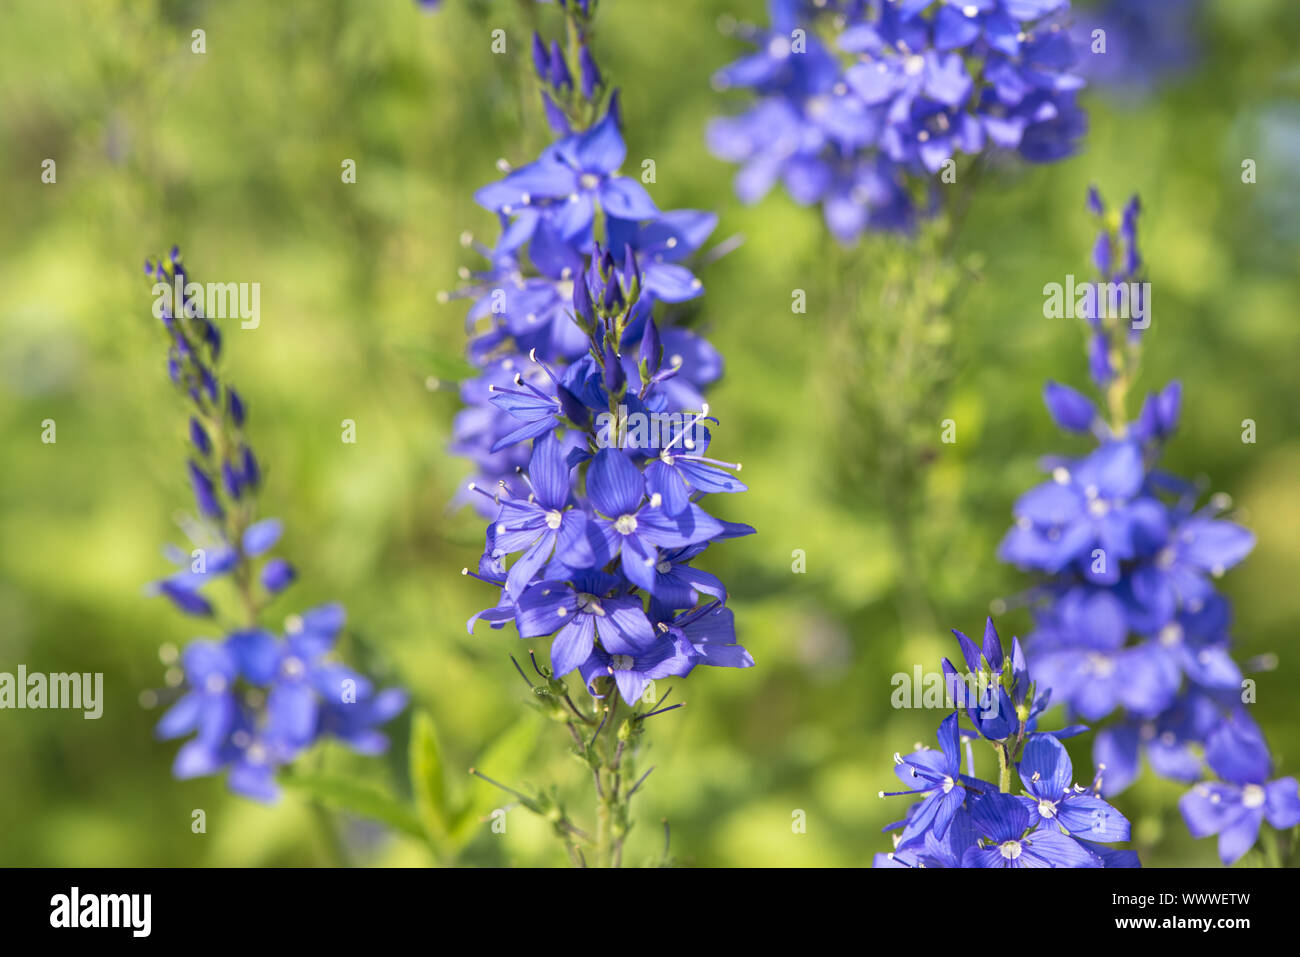 Honorary prize veronica officinalis Medicinal plant Stock Photo